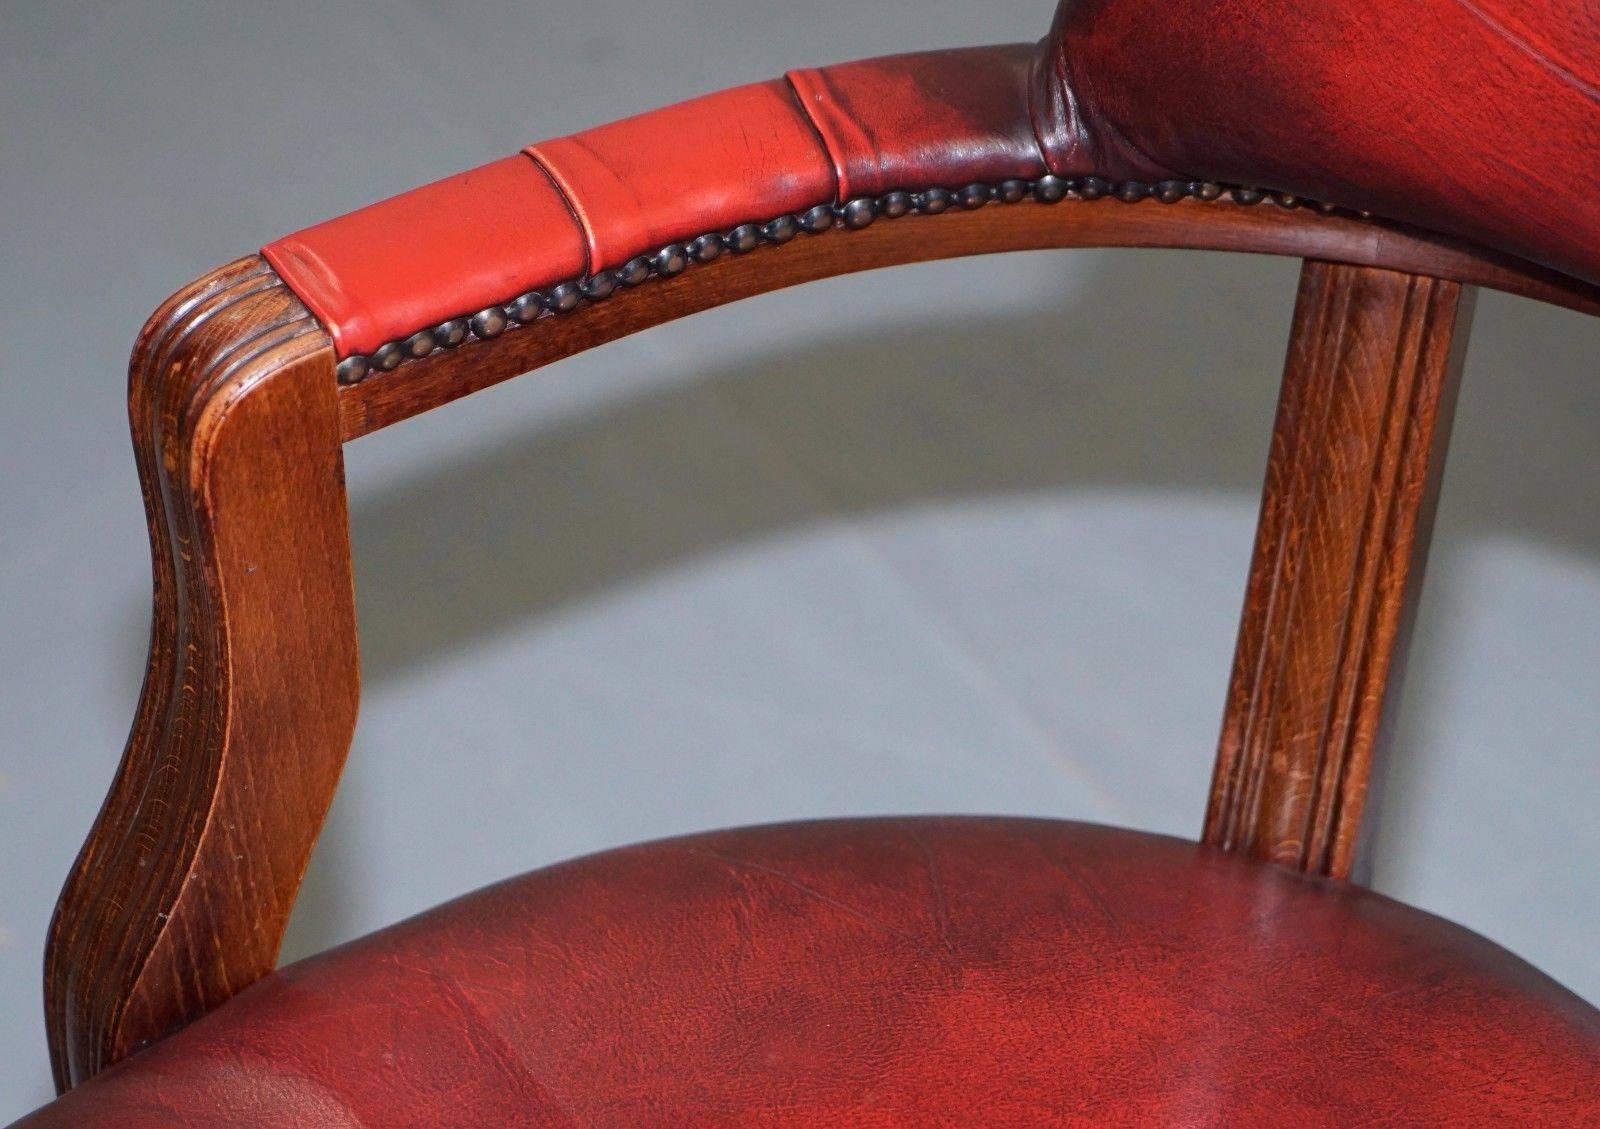 Hand-Carved Lovely Oxblood Leather Chesterfield Court Chair for Desks or Guests Lovely Find